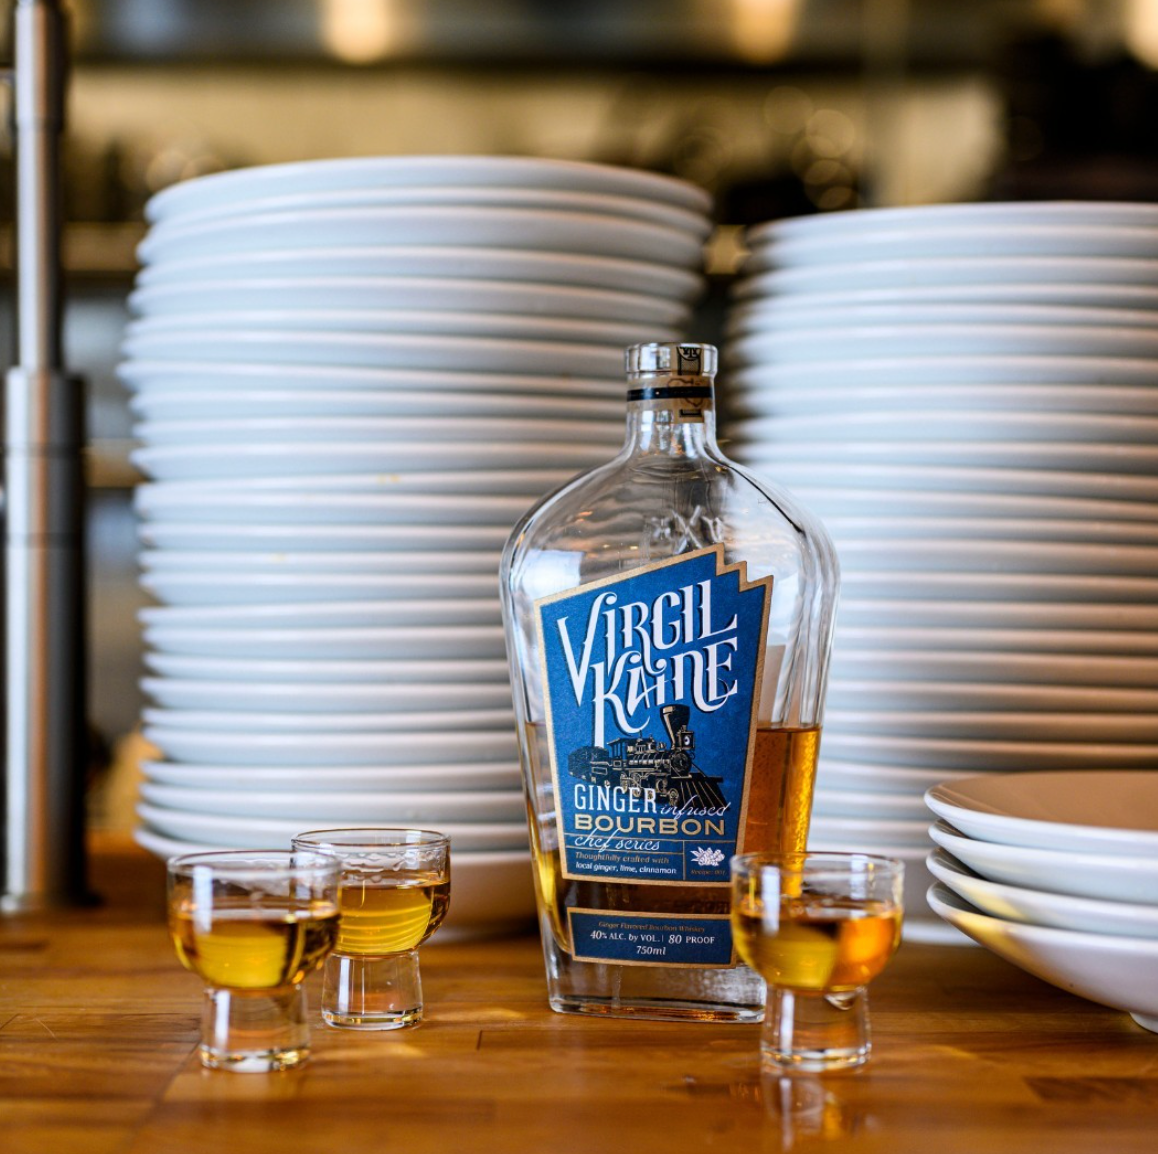 Virgil Kaine Ginger Infused Bourbon Chef Series